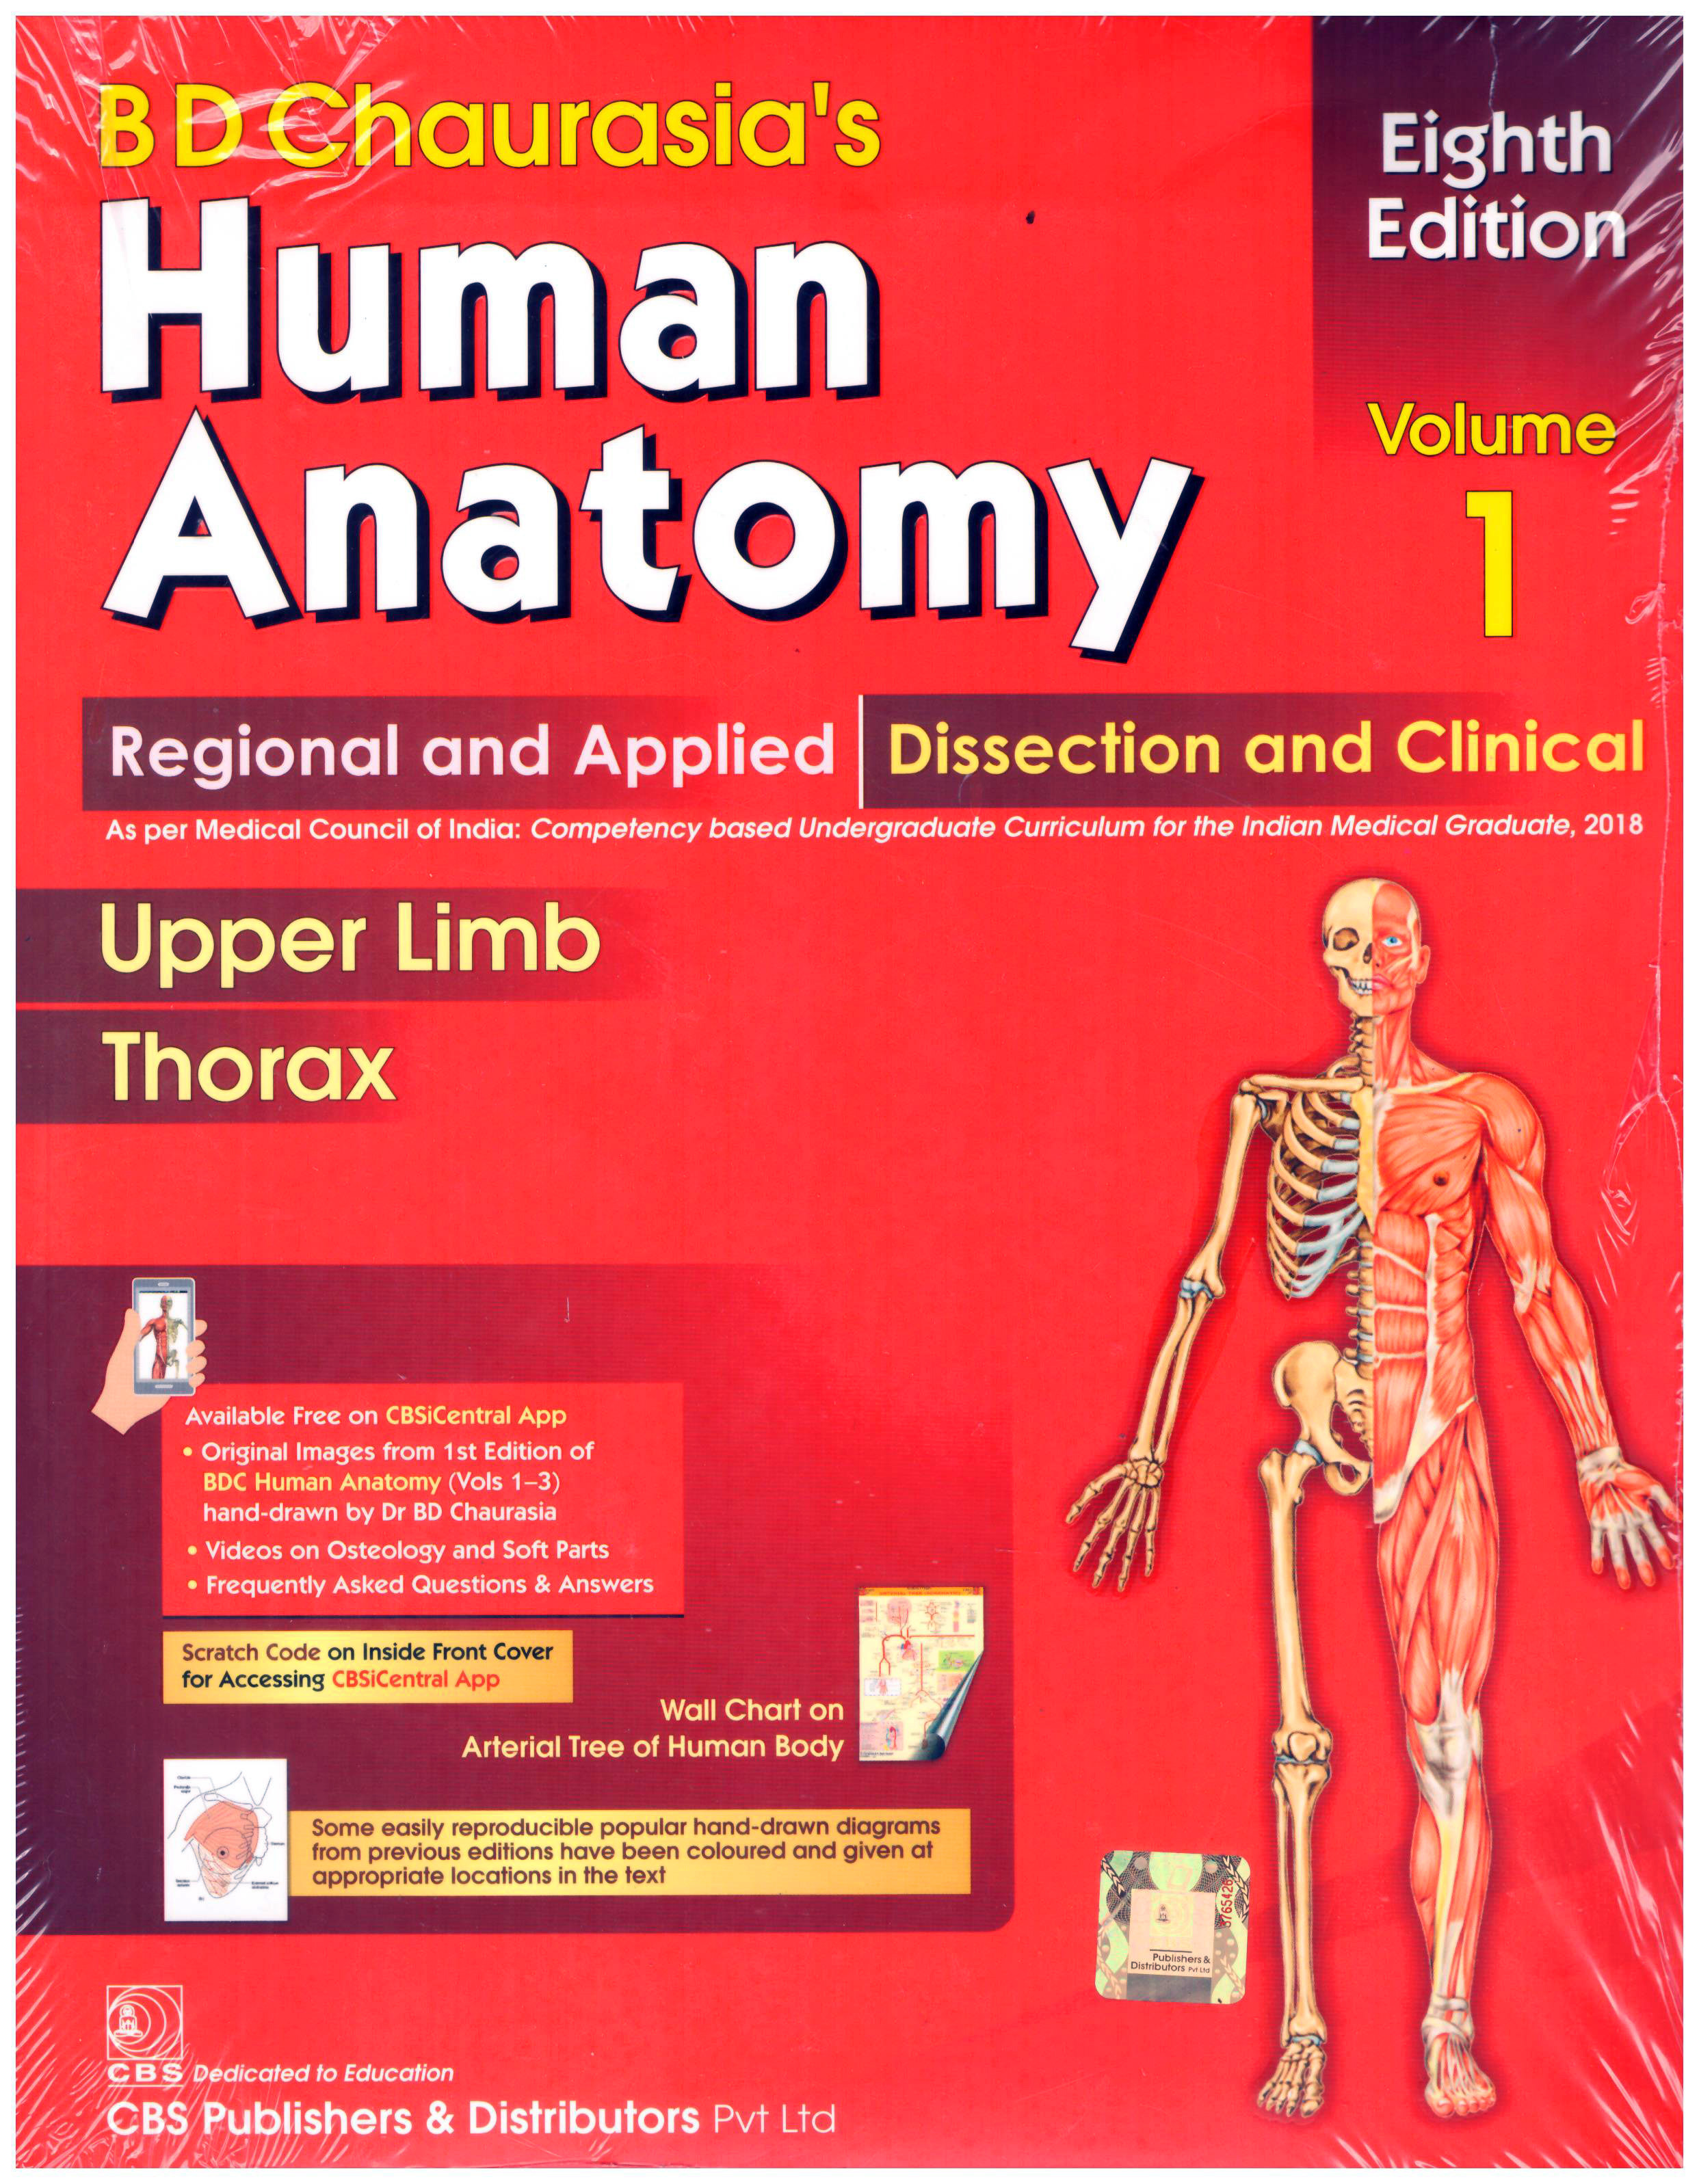 Human Anatomy regional and applied dissection and clinical upper limb Thorax Volume 1